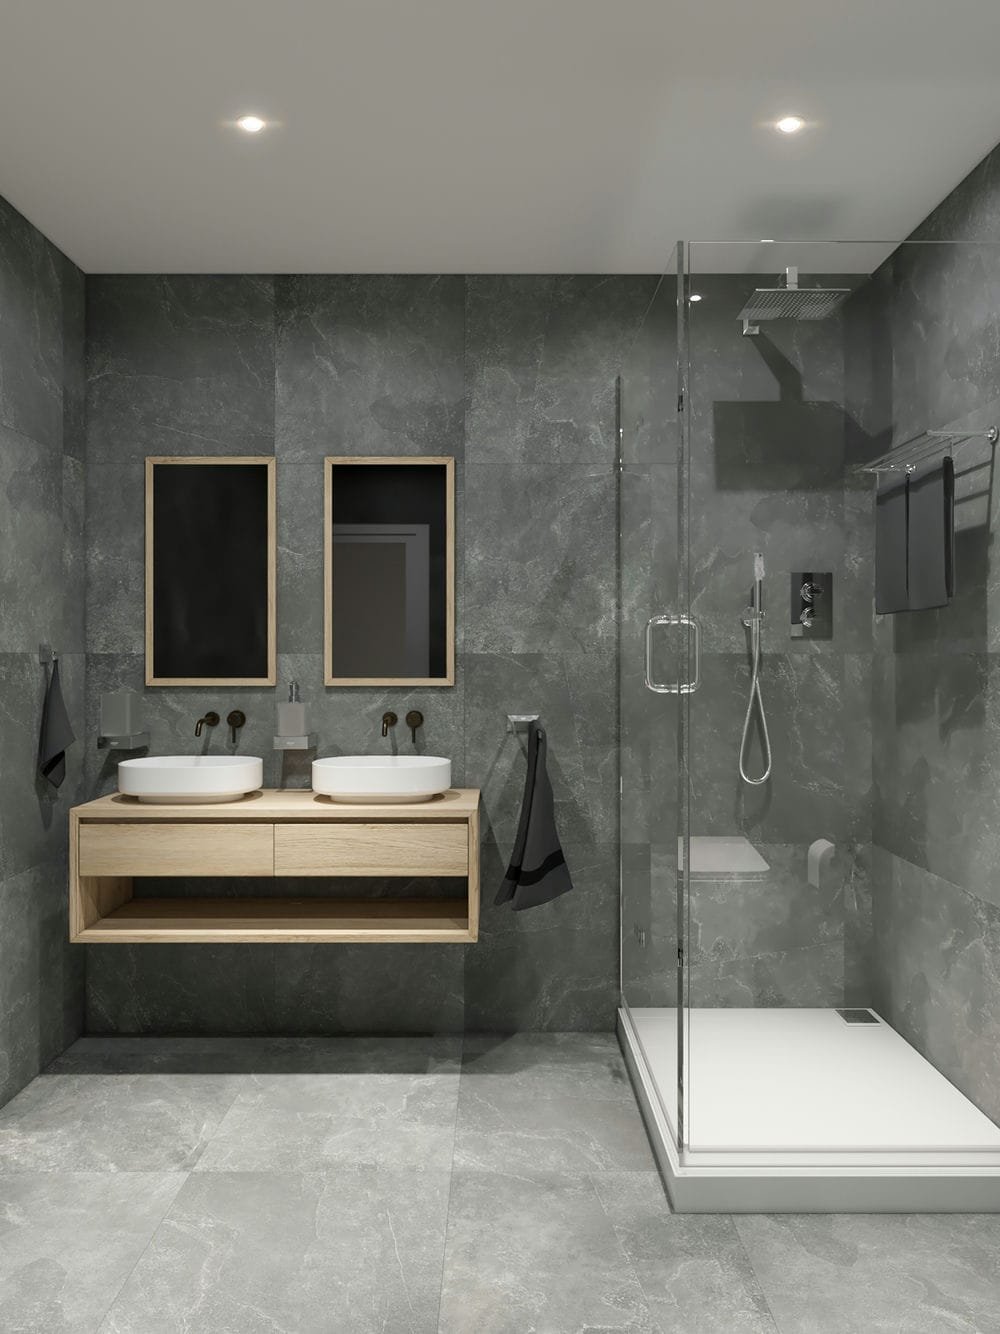 Bathroom Renovation Services in Greendale, WI